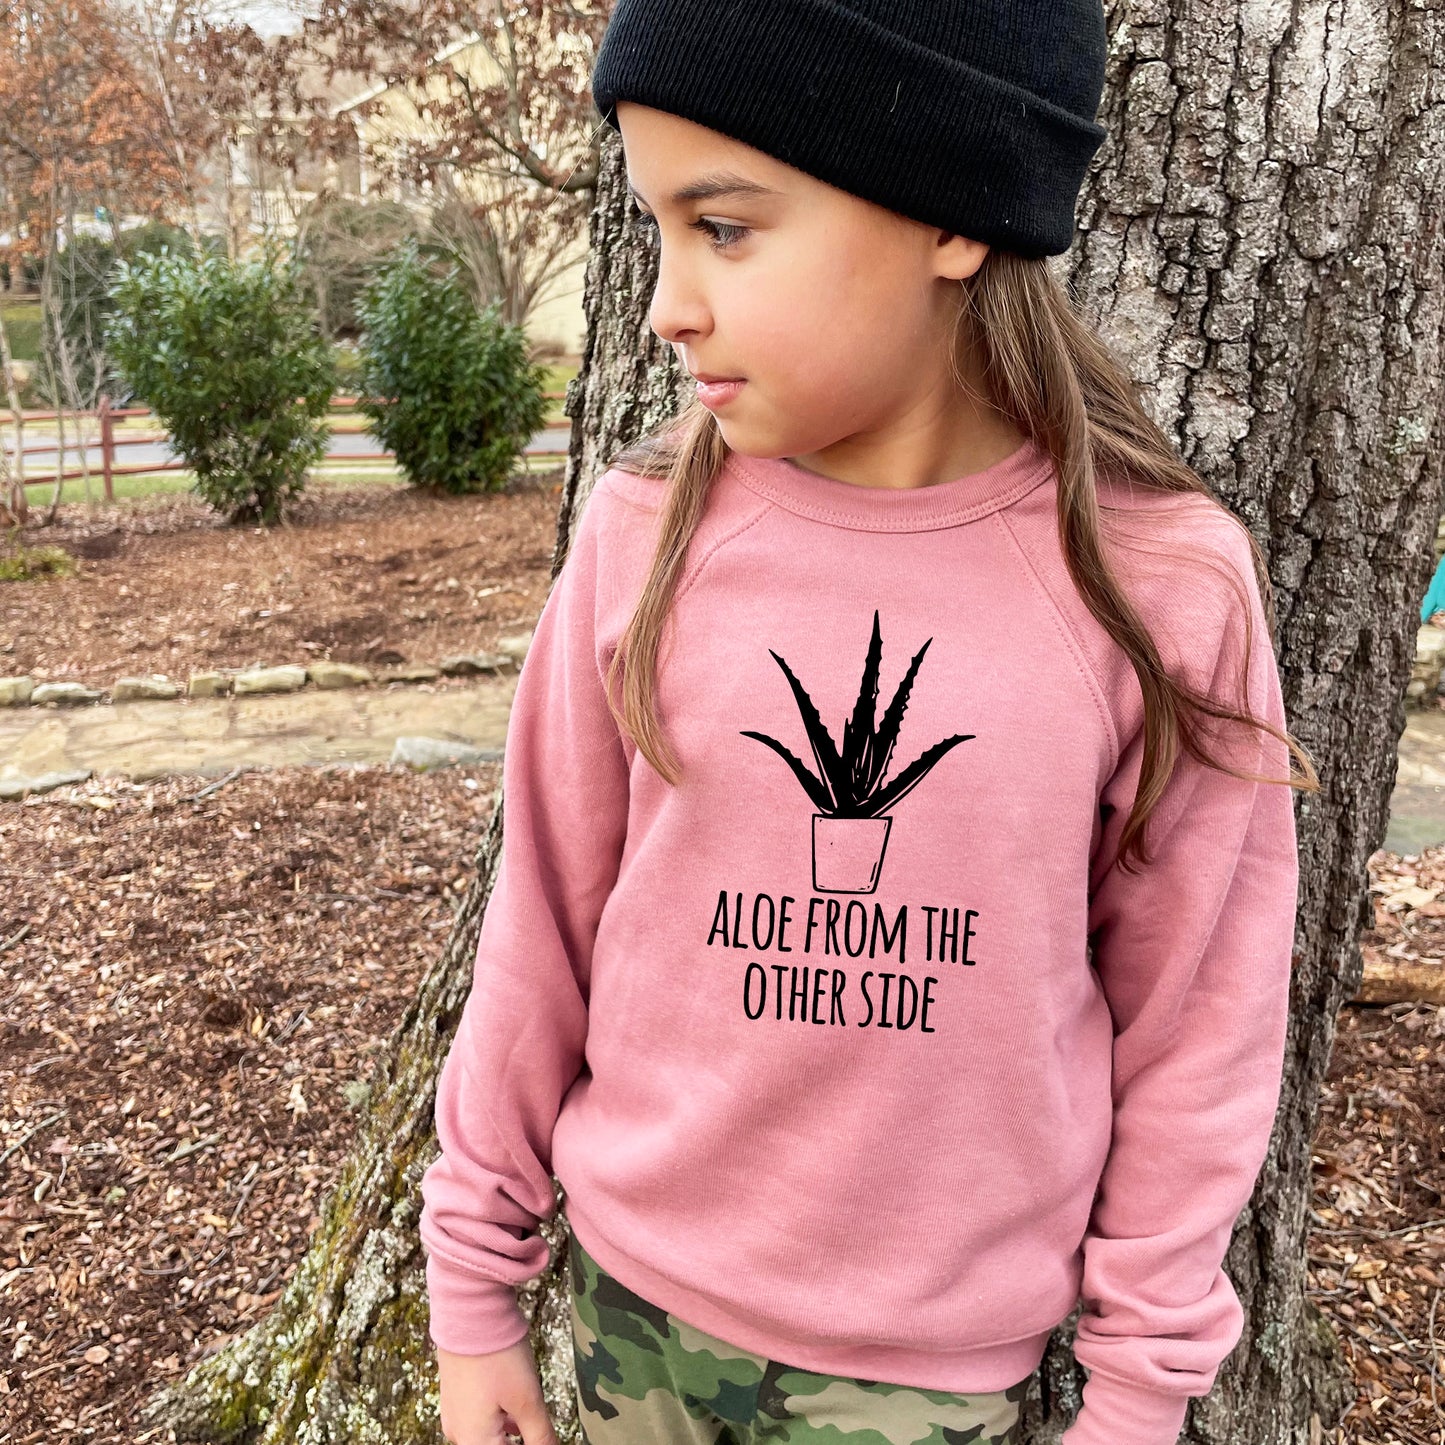 Aloe From The Other Side - Kid's Sweatshirt - Heather Gray or Mauve